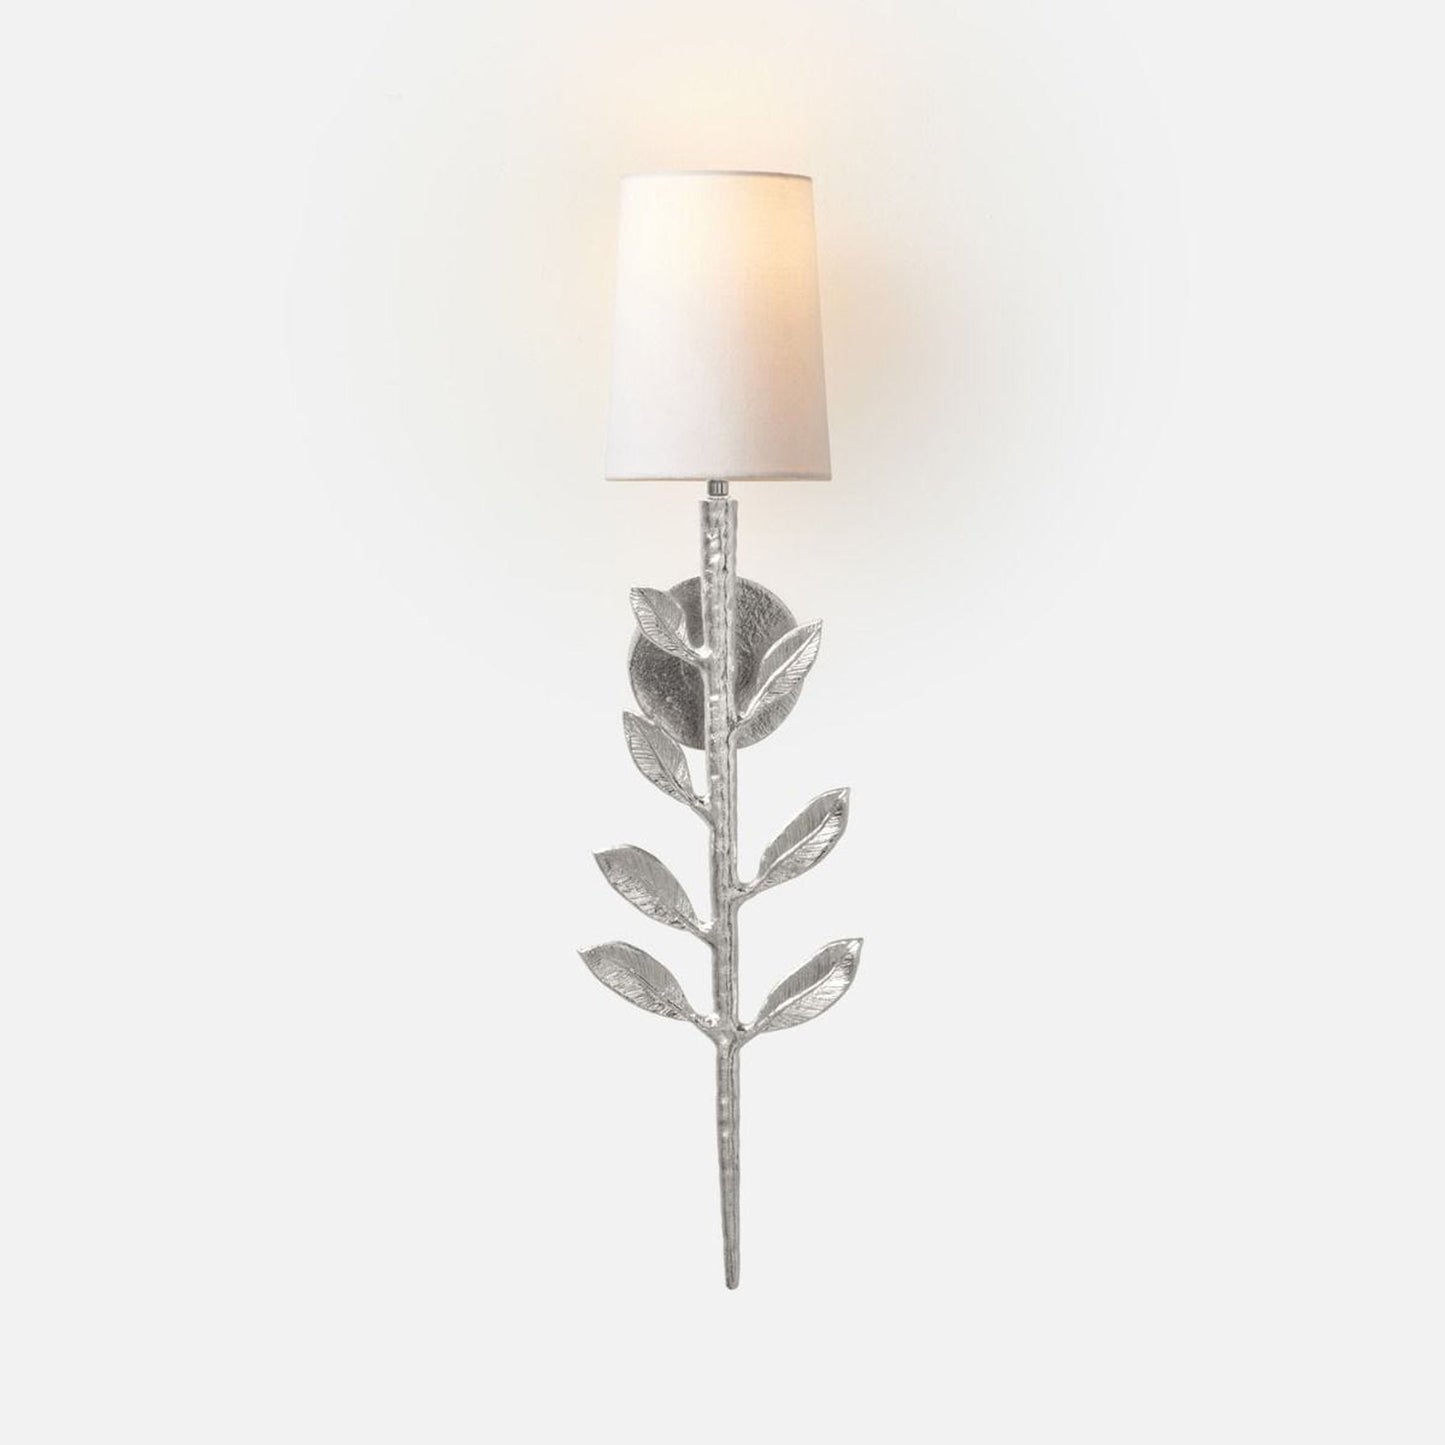 Made Goods Emmeline 7" x 26" 1-Light Plated Nickel Aluminum Sconce with Tapered Drum / White Linen Shade